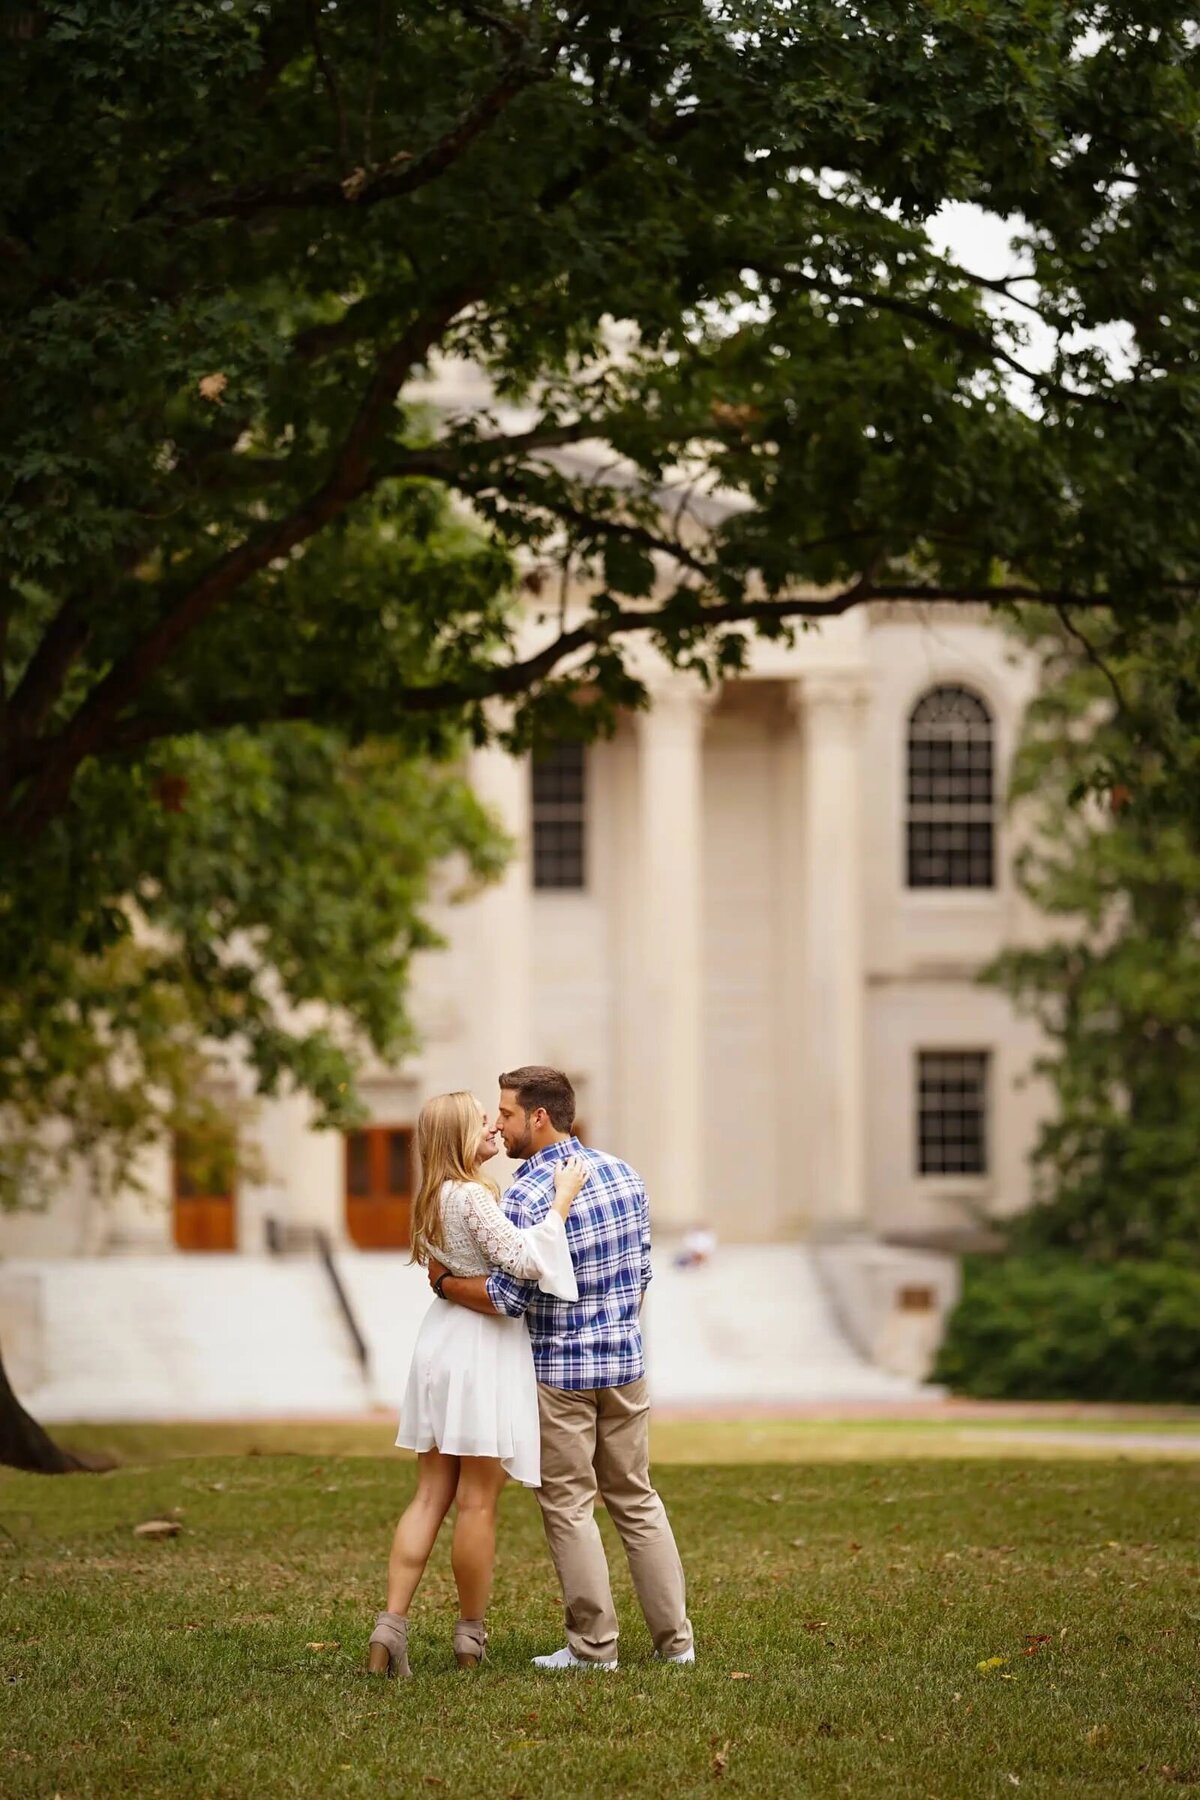 A couple embracing in front of a grand building with large columns, surrounded by lush trees